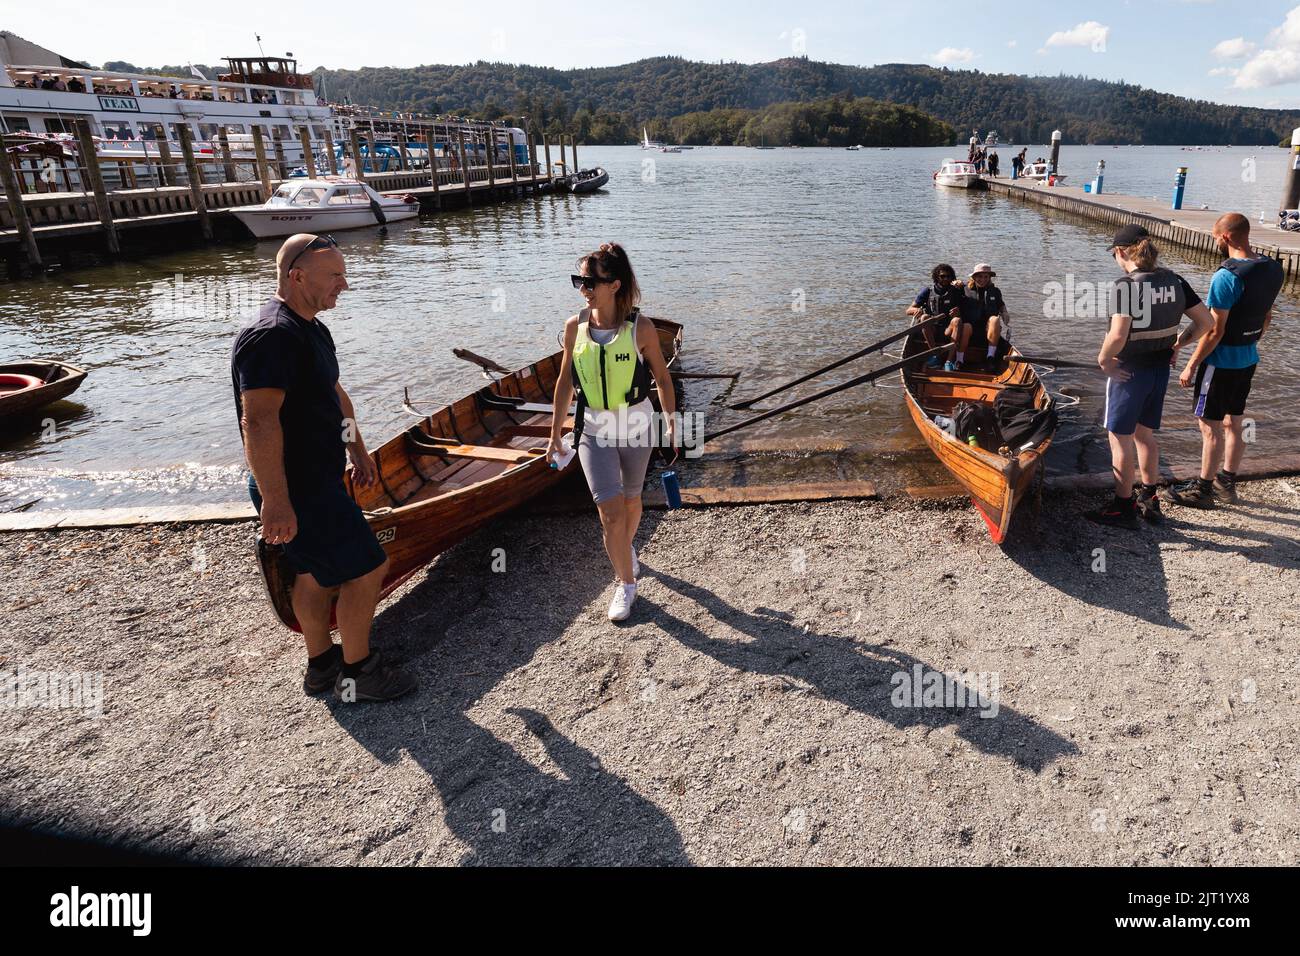 Lake Windermere Cumbria 27th August 2022 .UK Weather Vessels of all sizes & age busy with tourist make the most of the Bank Holiday weekend weather Traditional Windermere wooden Rowing Boats . Credit: Gordon Shoosmith/Alamy Live News Stock Photo